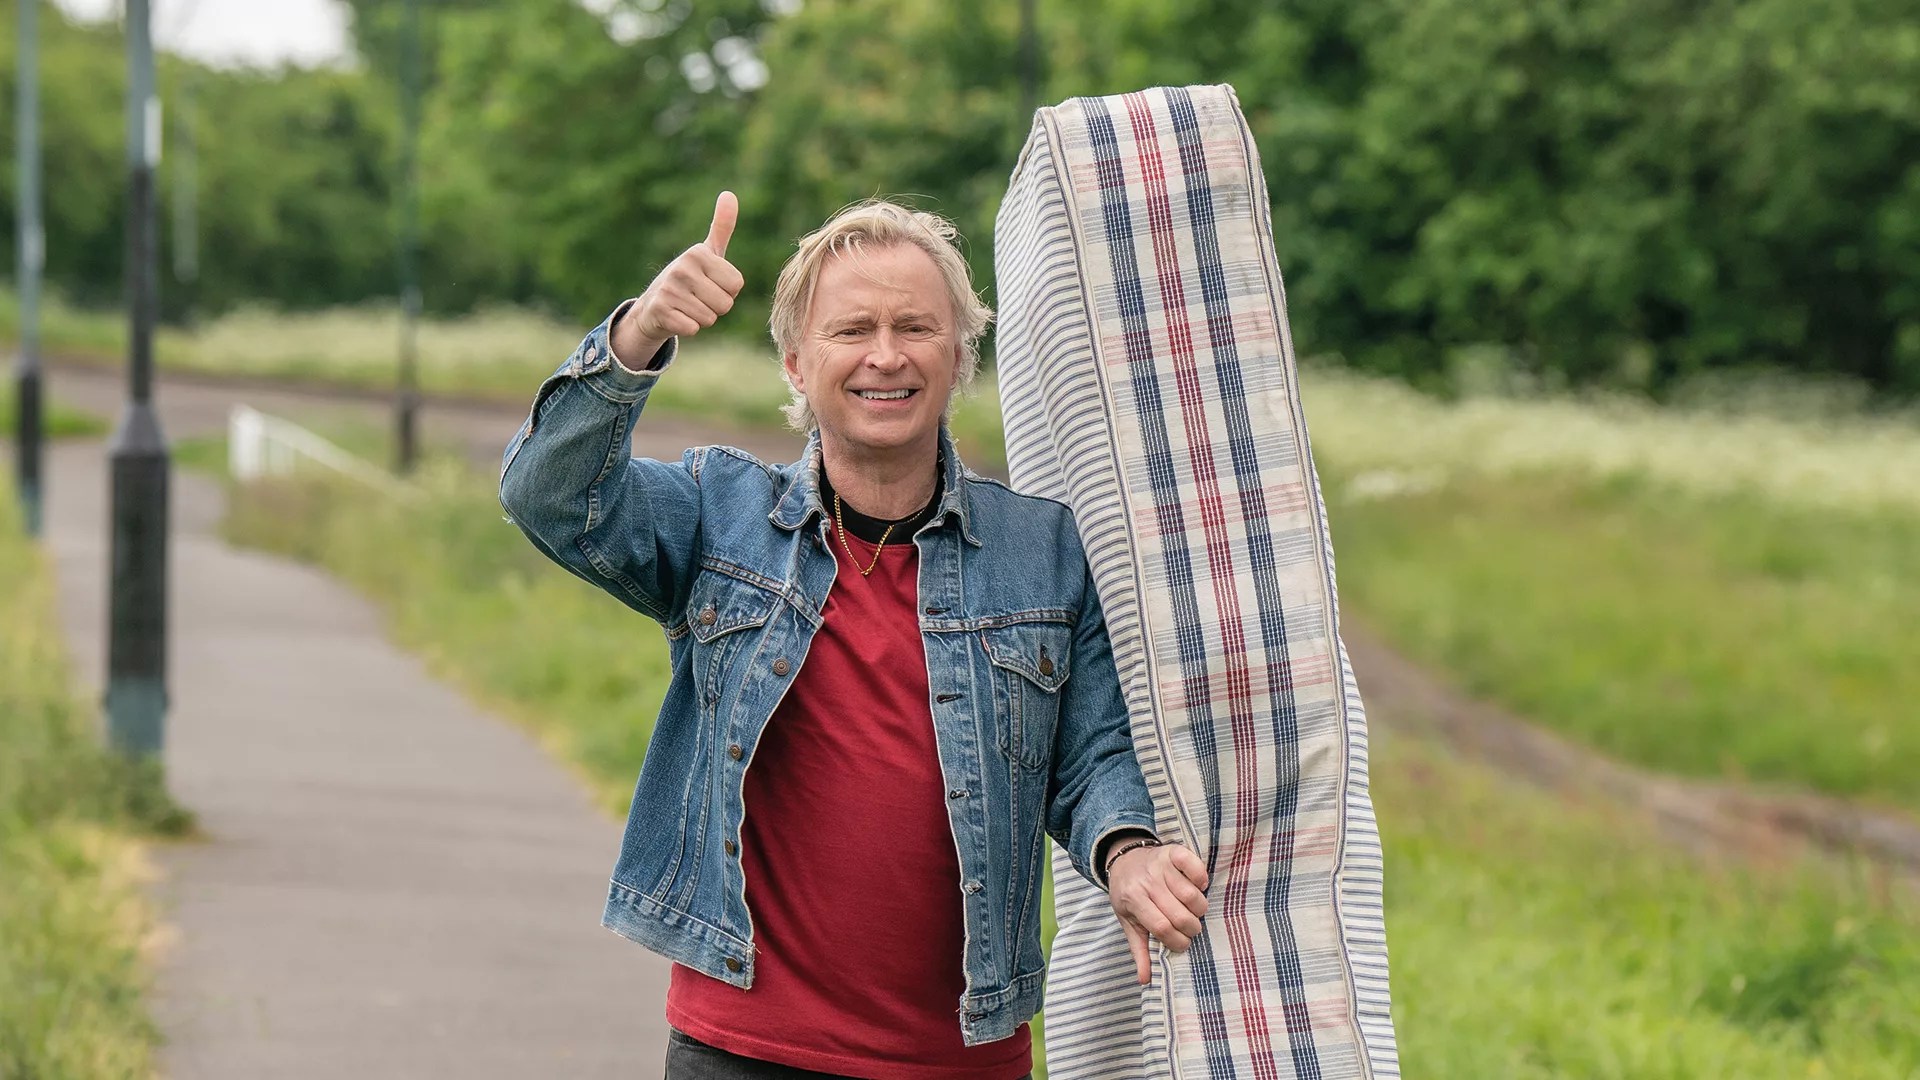 Robert Carlyle as Gaz in The Full Monty carrying a mattress